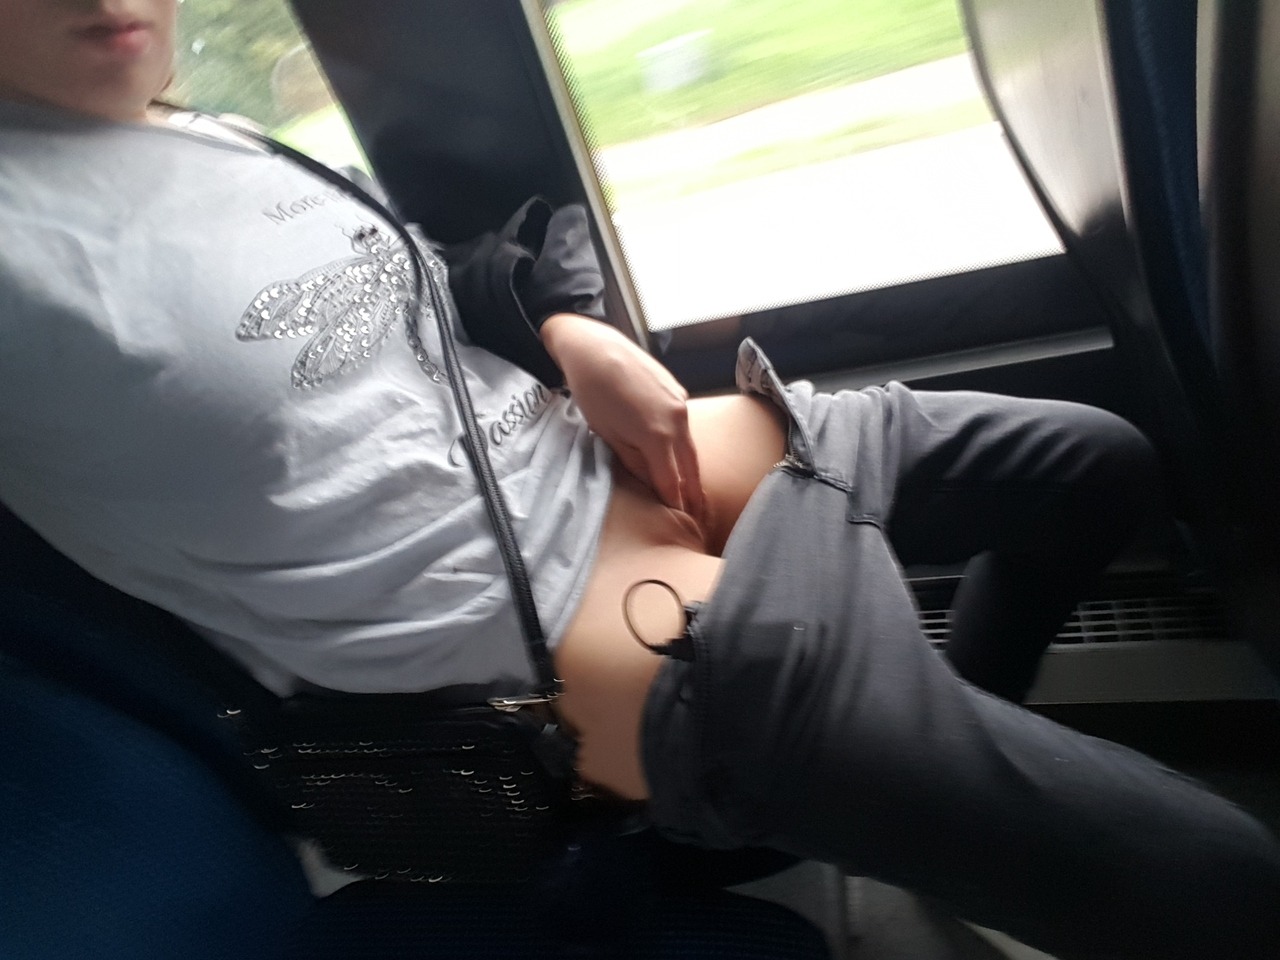 19yearoldslut: Yes I’m in the bus, touching myself ♡ I have to be in the bus